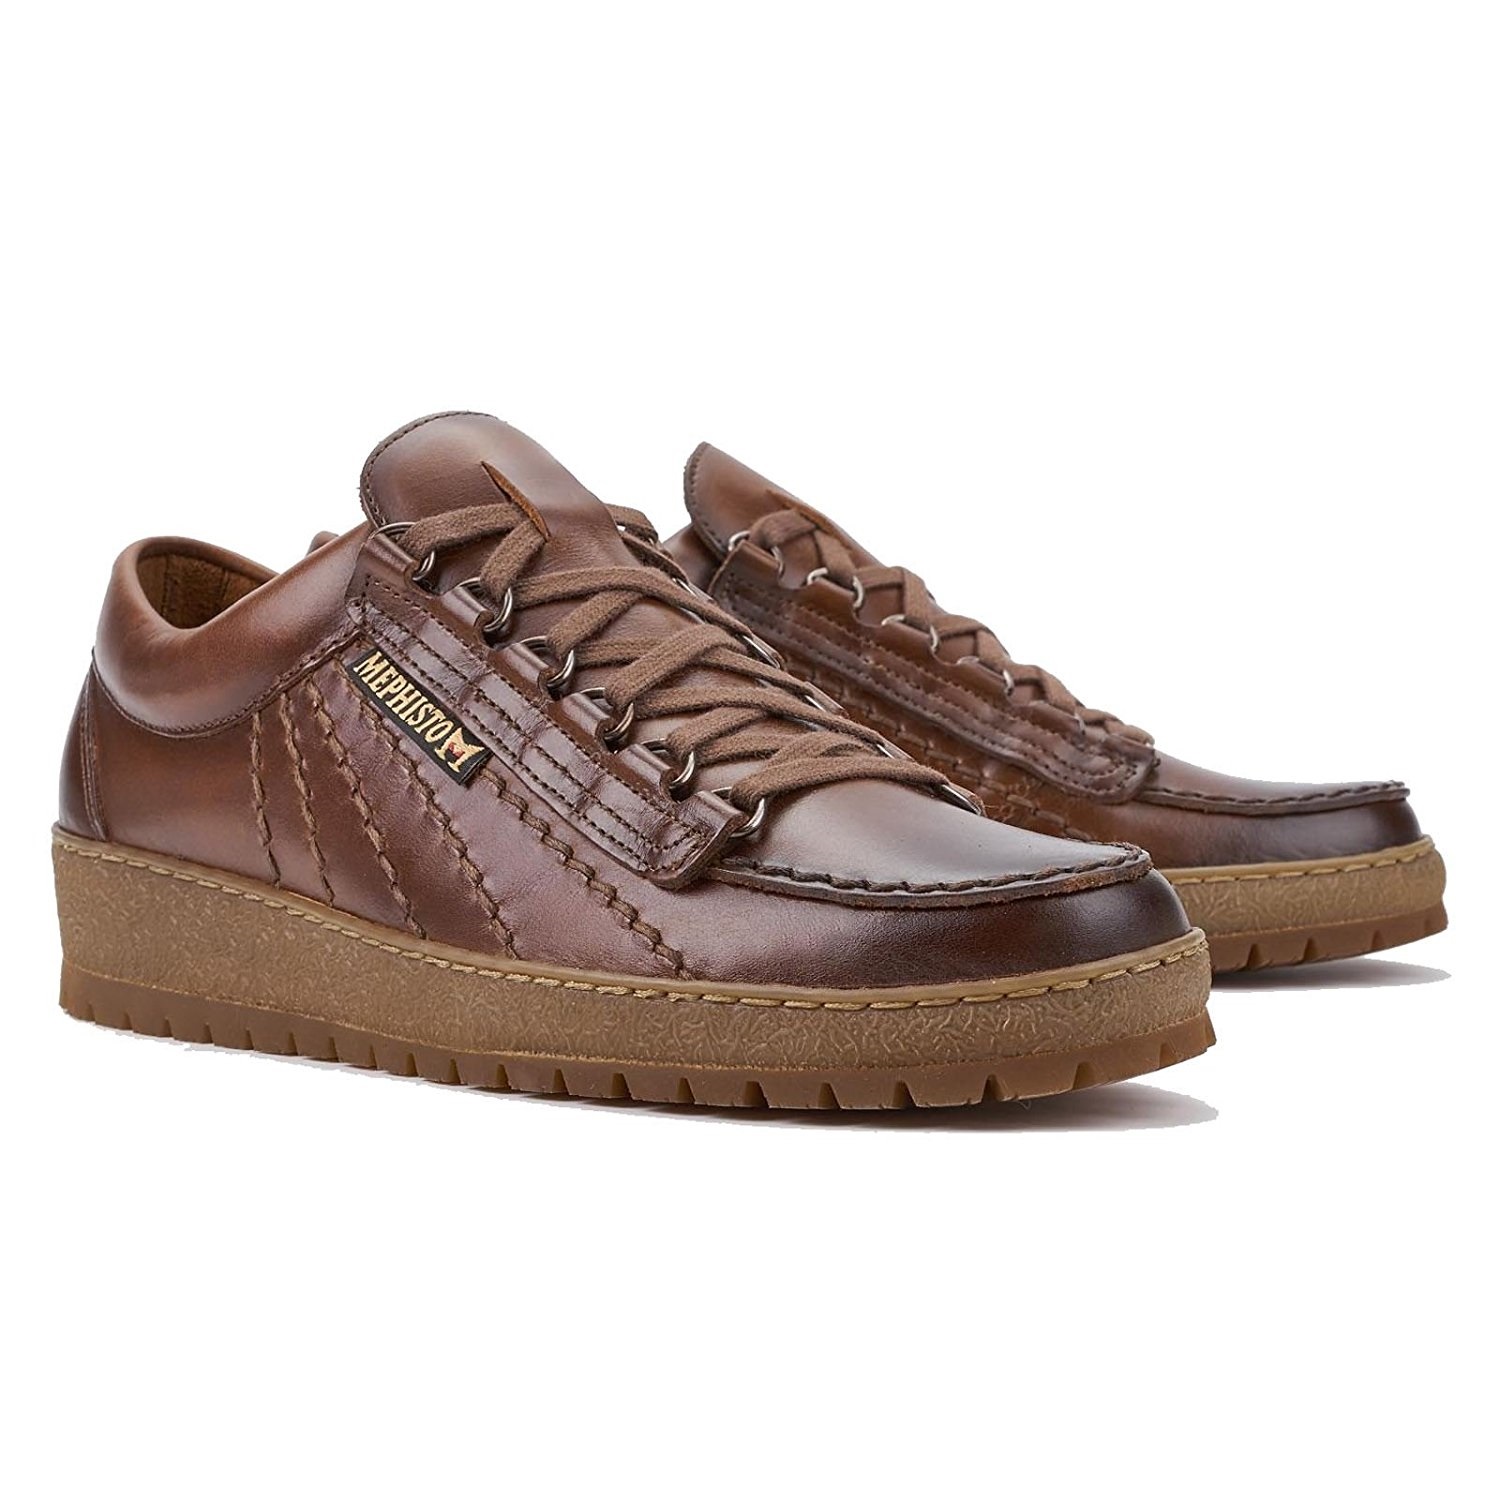 Men's Mephisto Rainbow Lace-Up Leather Shoes - Chestnut